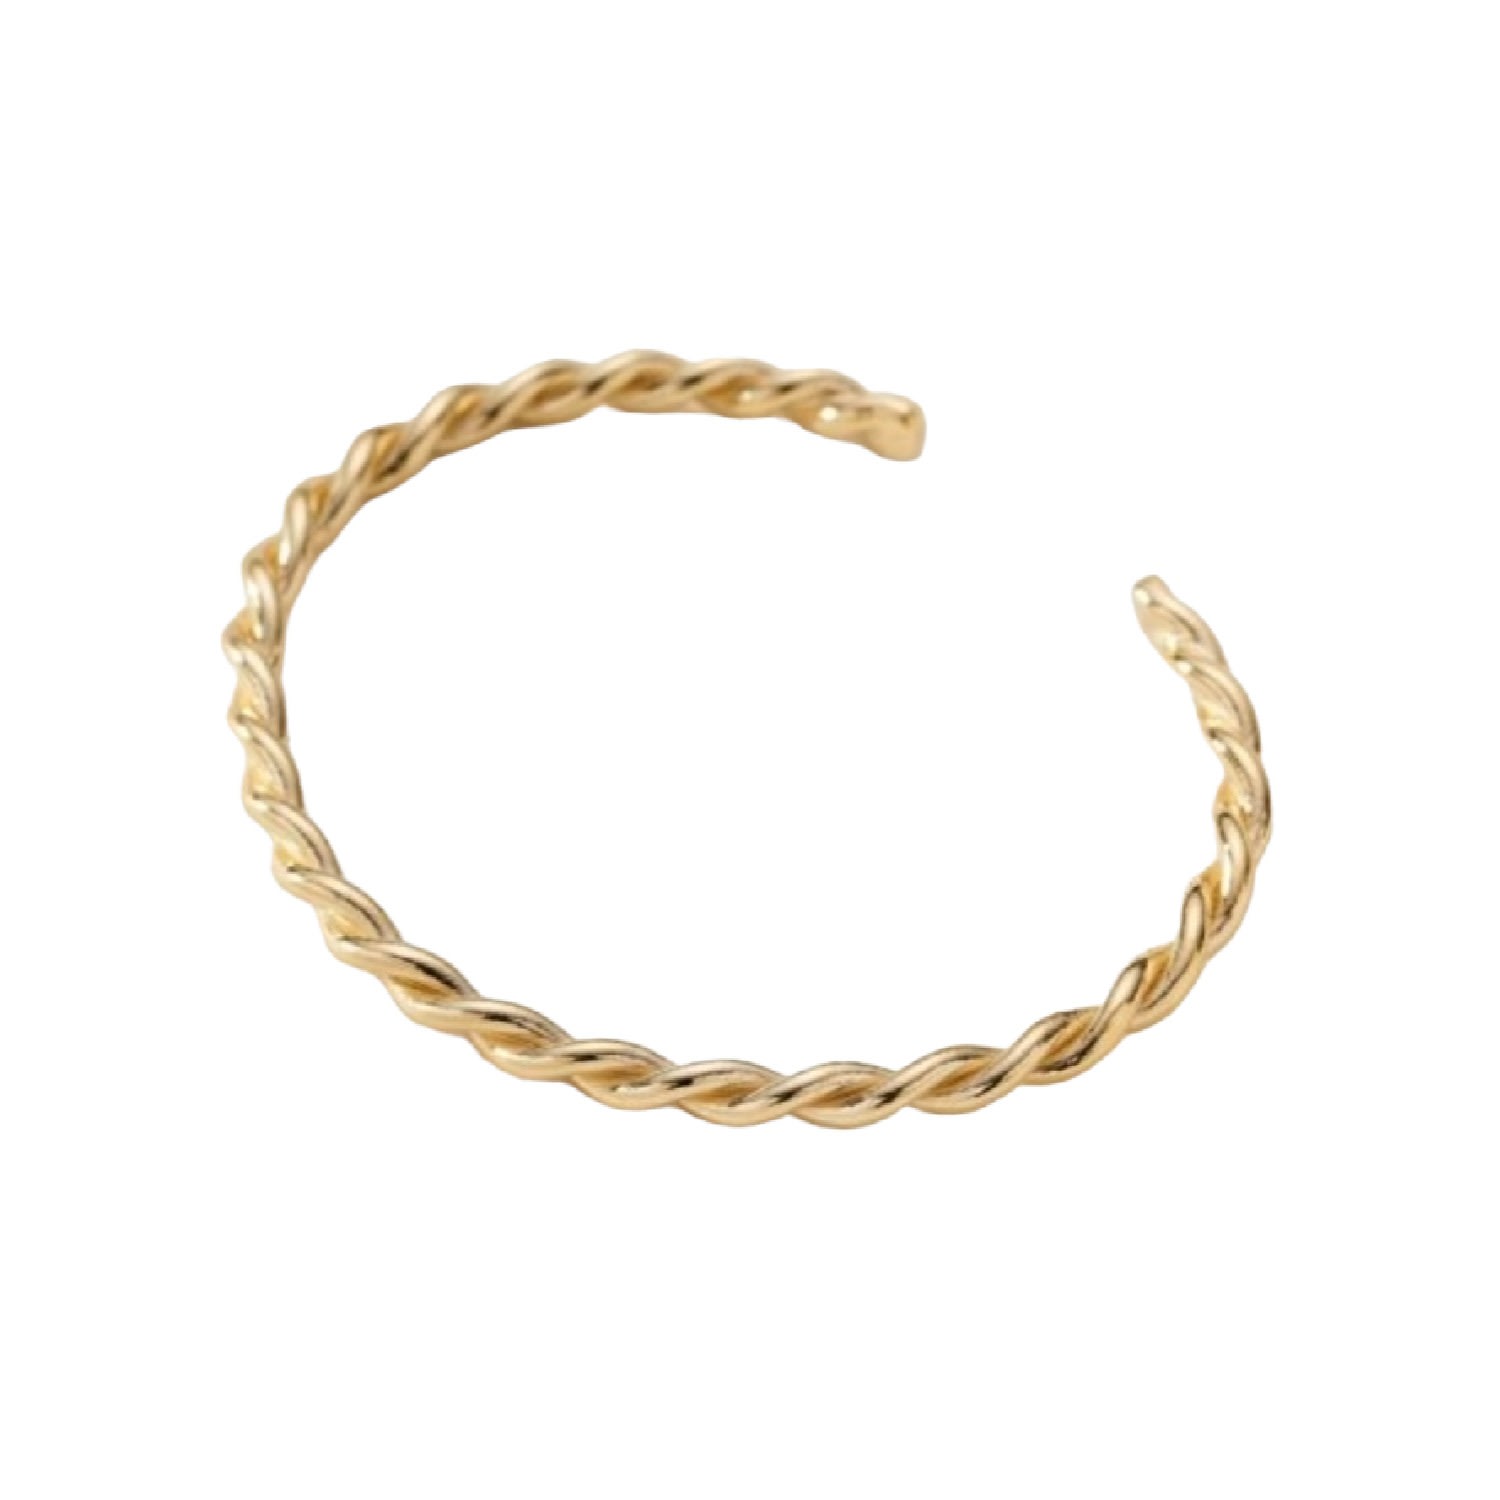 Posh Totty Designs Women's Yellow Gold Plated Twisted Cuff